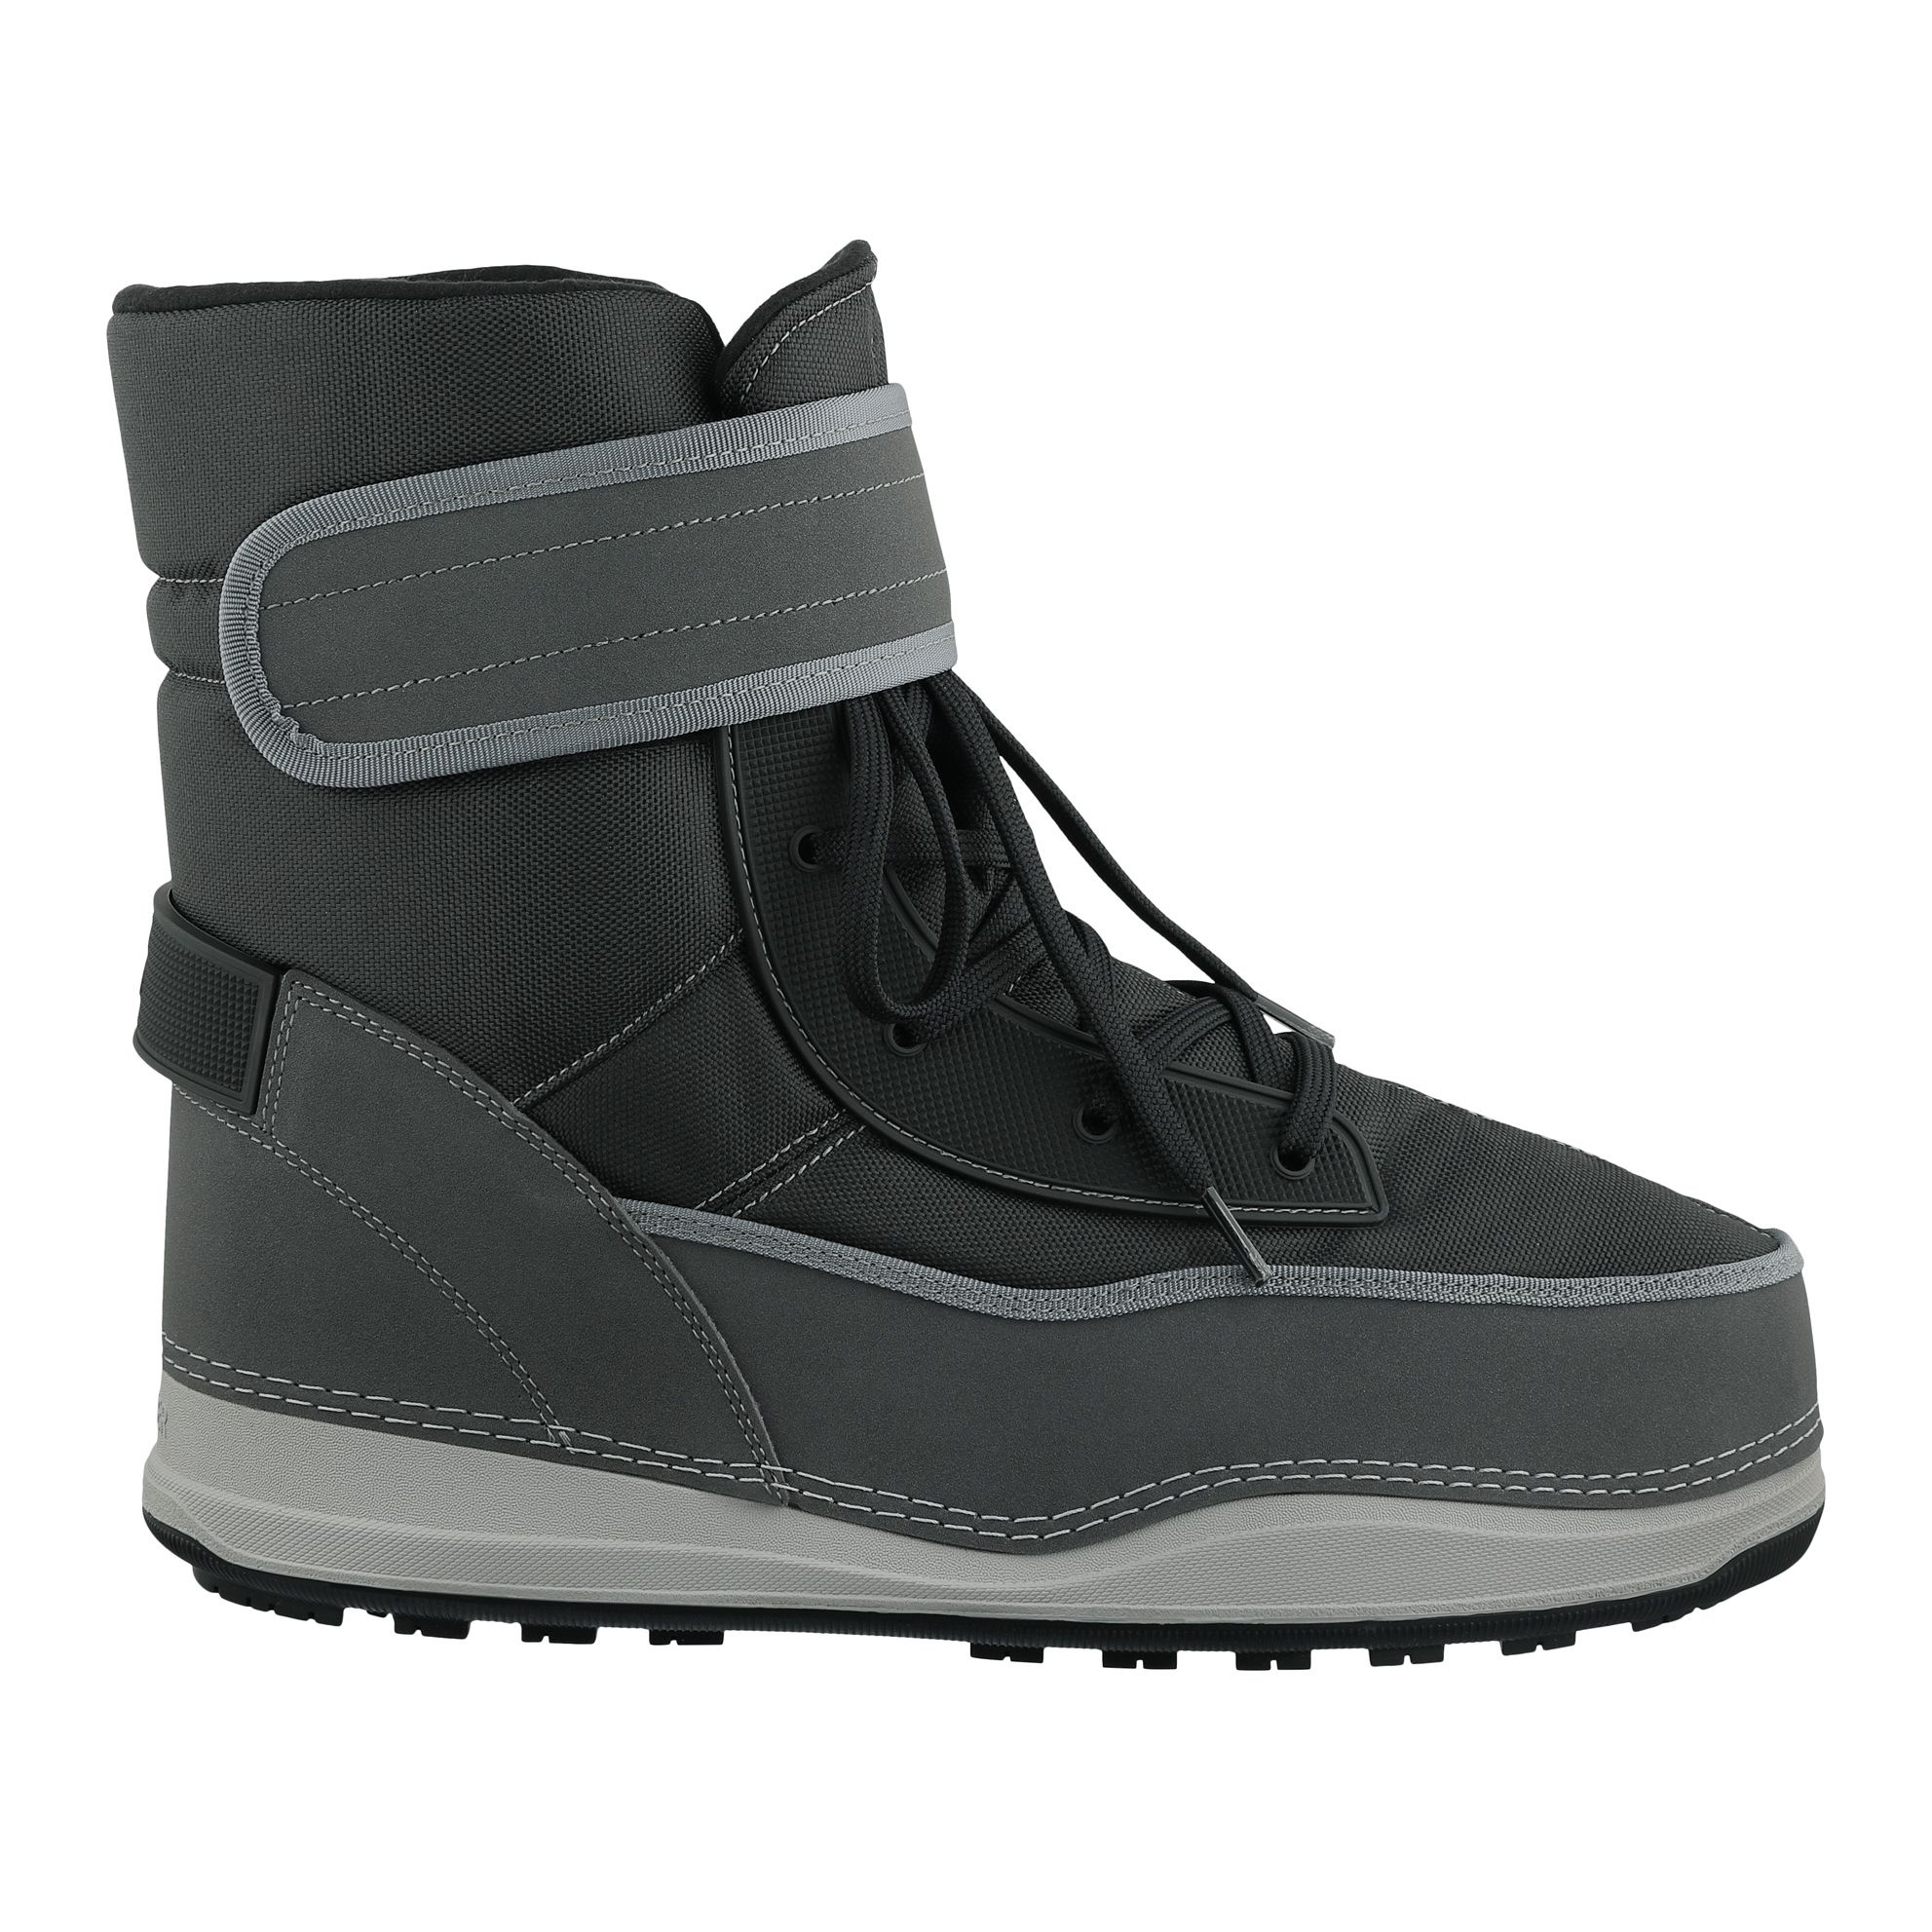 Winter Shoes -  bogner Laax 1A Snow Boots